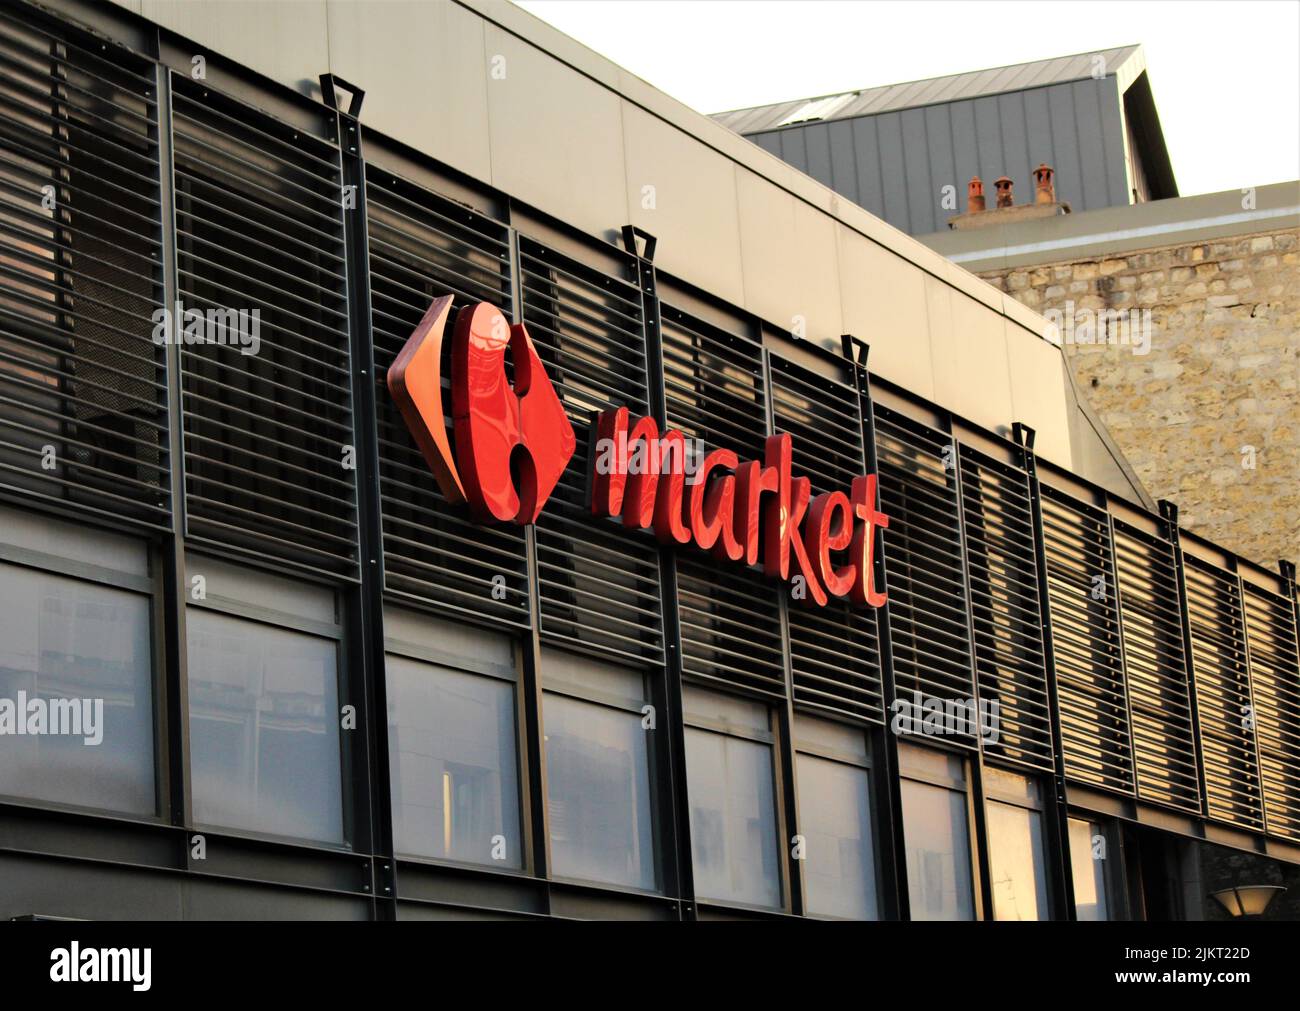 Carrefour Market logo at sundown. Carrefour Market is a French supermarket chain created in 2007 with stores across the globe. Stock Photo